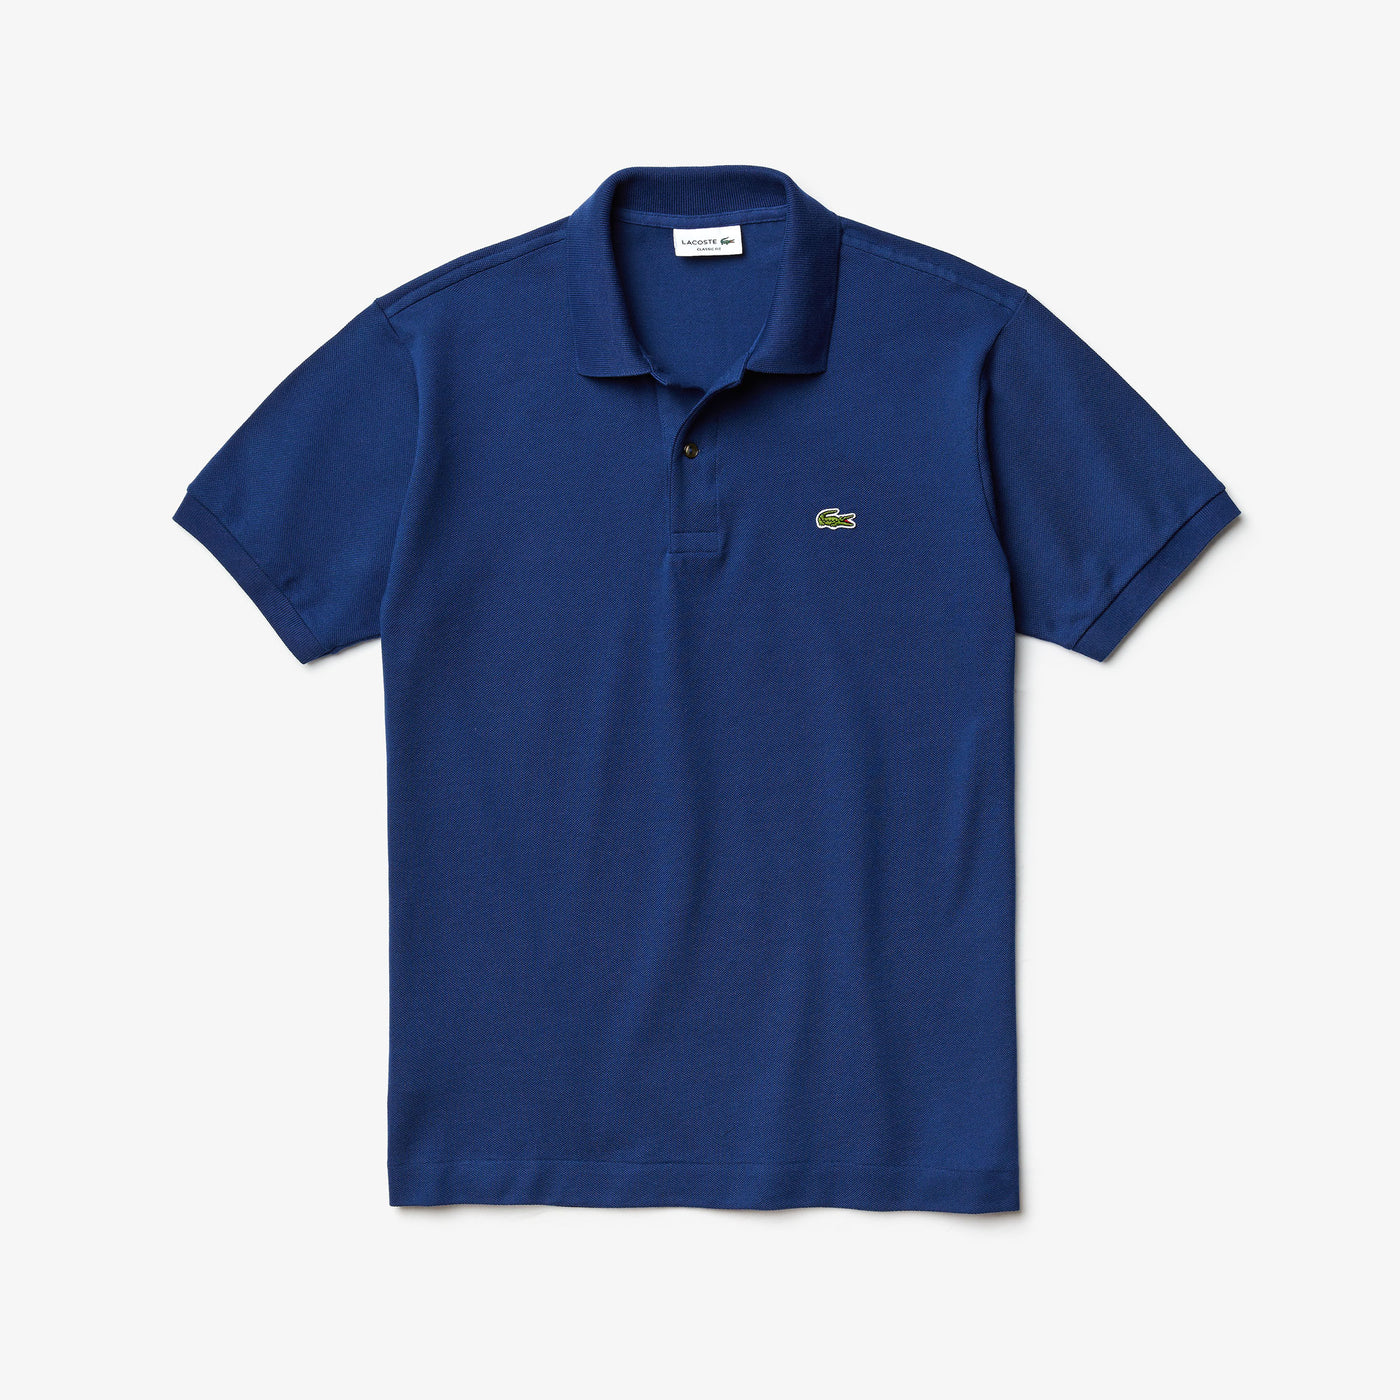 Shop The Latest Collection Of Lacoste Original L.12.12 Polo Shirt In Lebanon